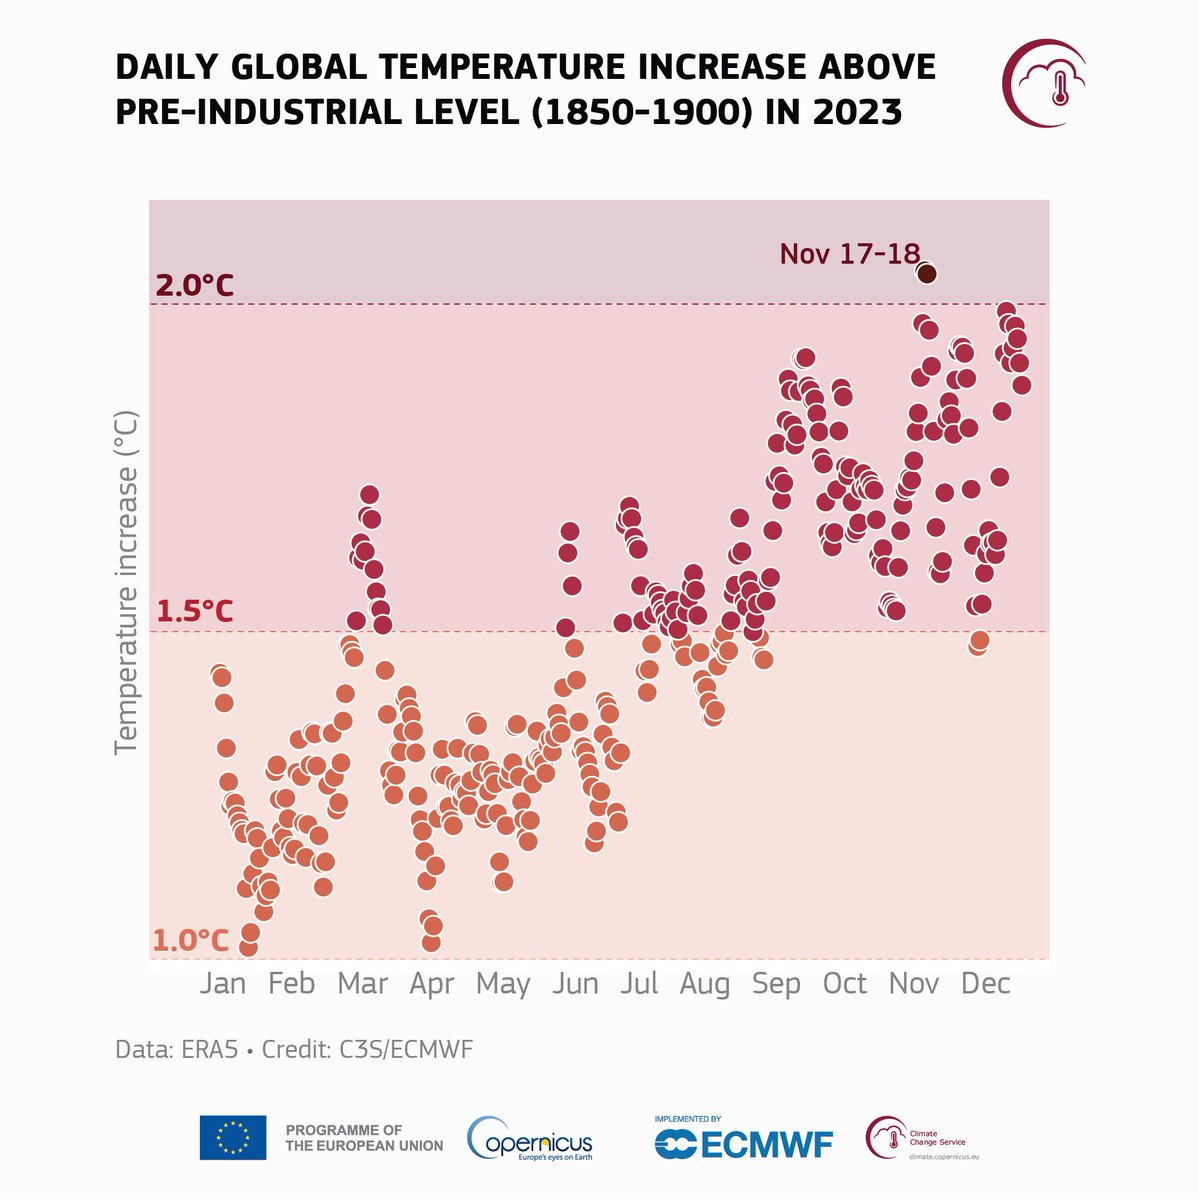 2023 marks the first time on record that every day within a year has exceeded 1°C above the 1850-1900 pre-industrial level for that time of year. Close to 50% of days were more than 1.5°C warmer than the 1850-1900 level, and two days in November were, more than 2°C warmer.